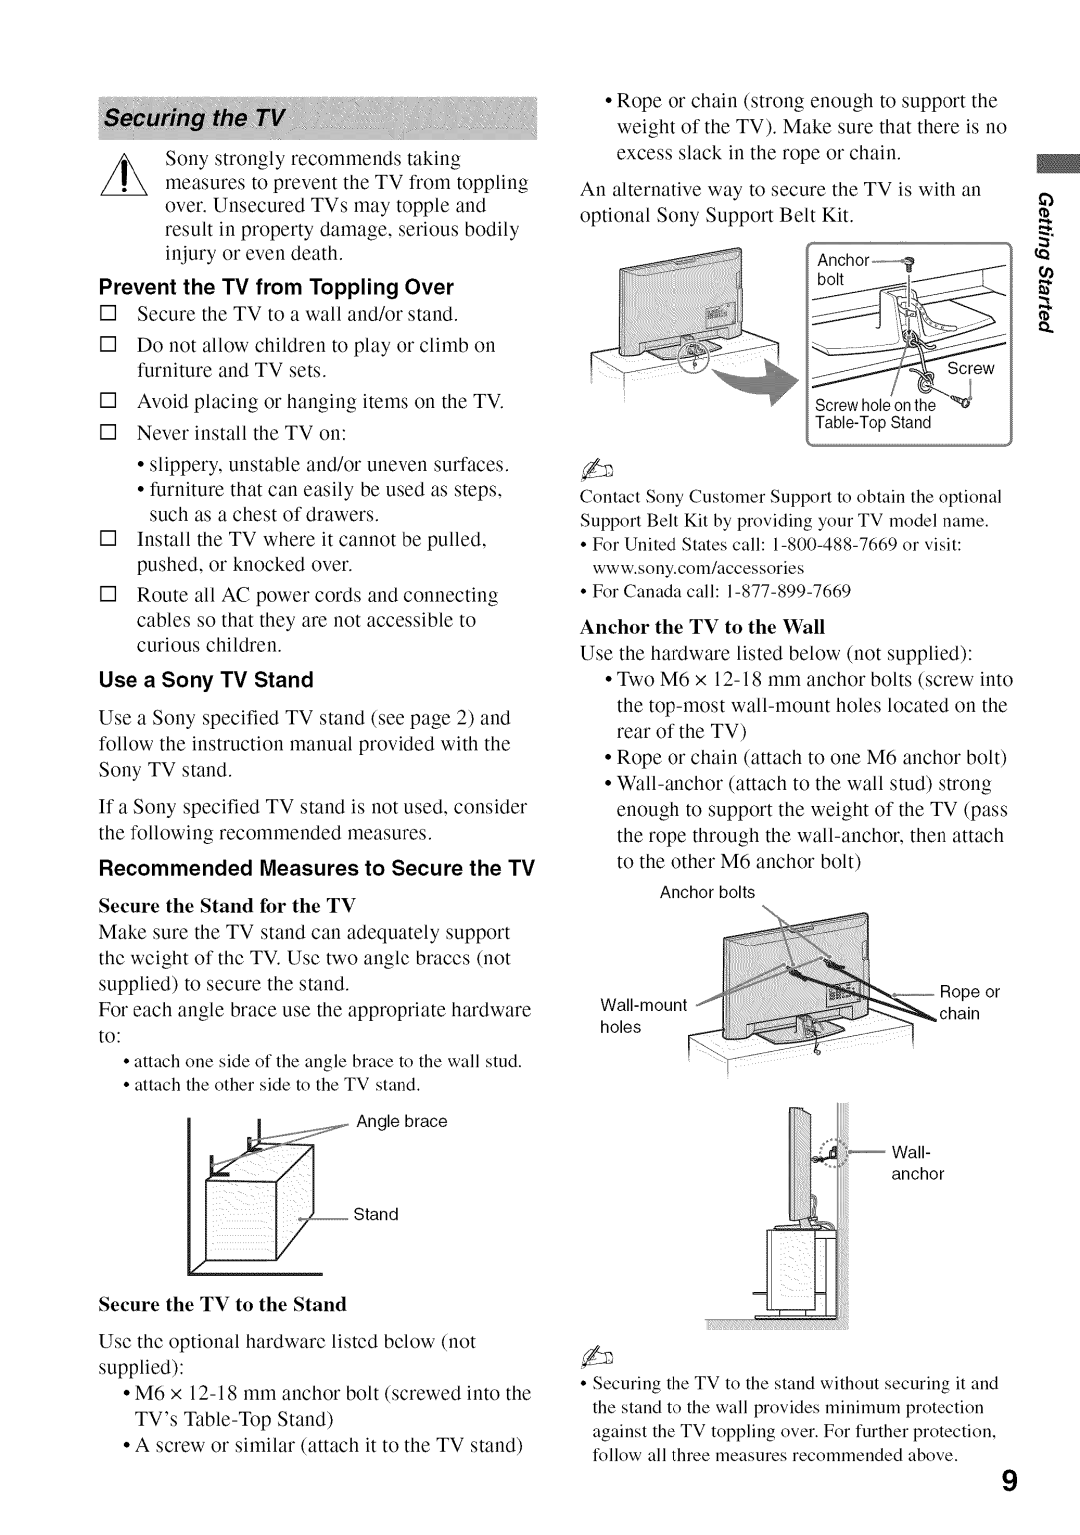 Sony KDL52V4100 Prevent the TV from Toppling Over, Use a Sony TV Stand, Recommended Measures to Secure the TV 